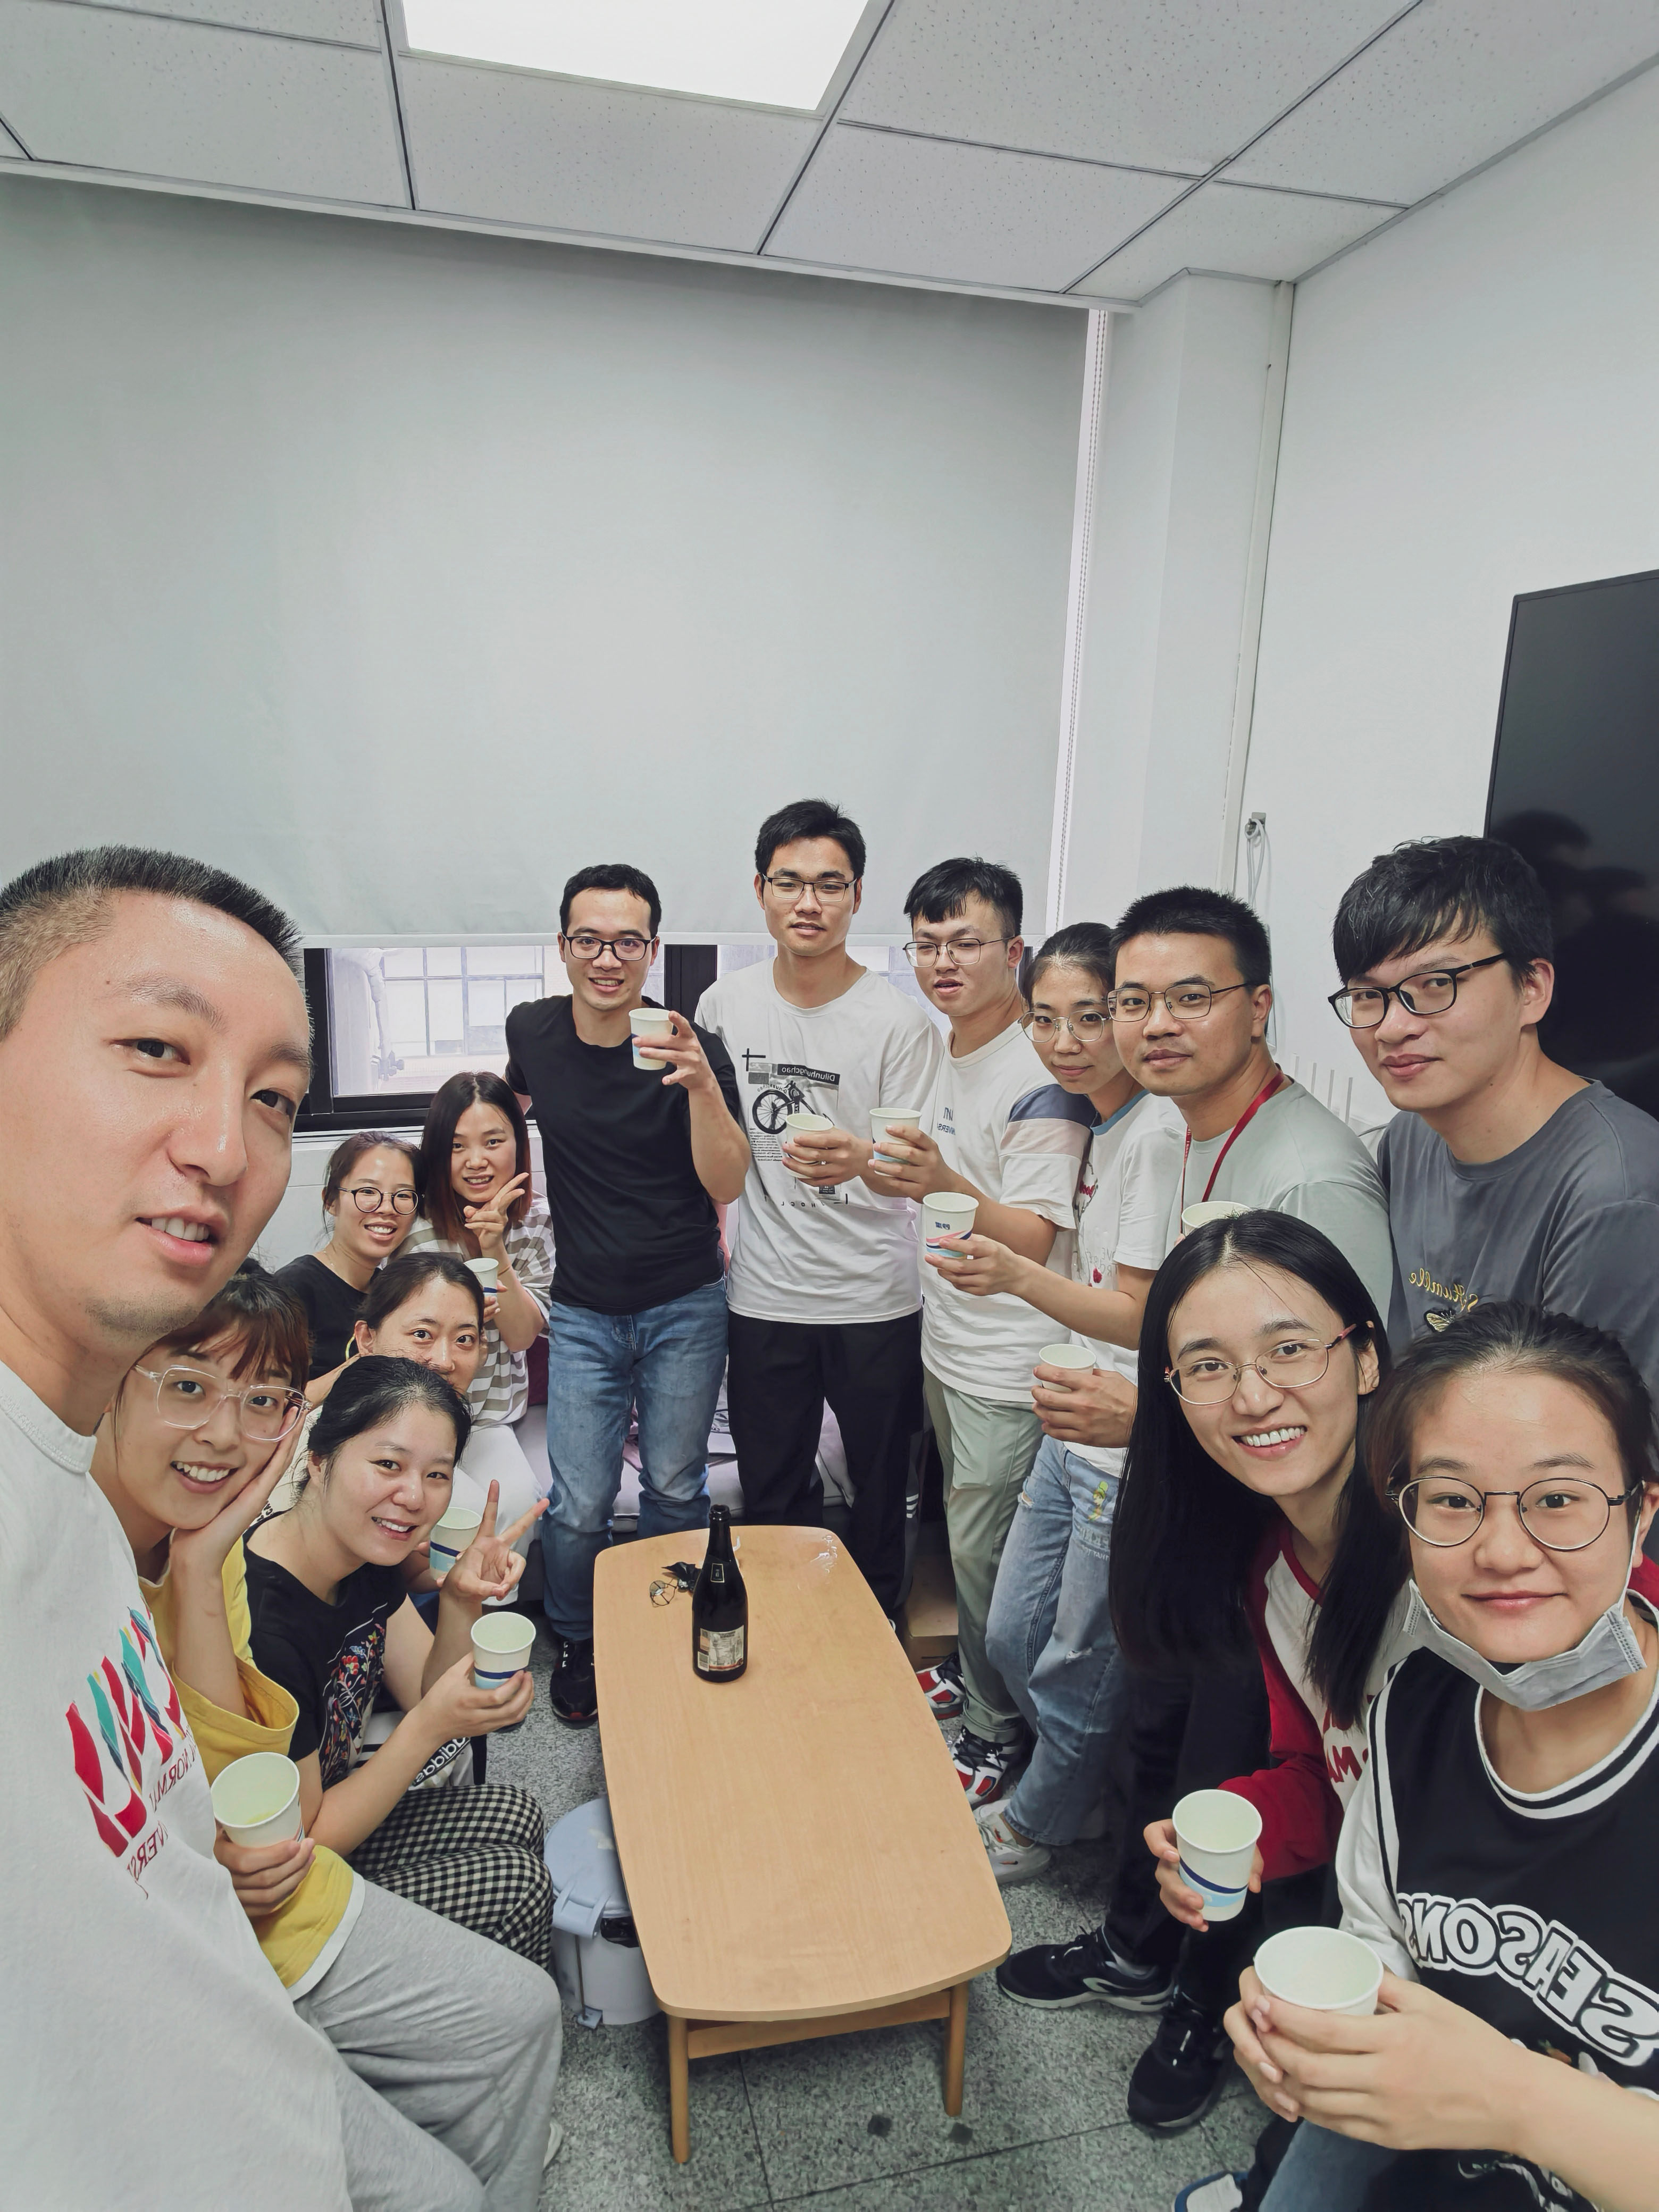 Celebration for Dr Chen finished his two year postdoc journey in our LAB